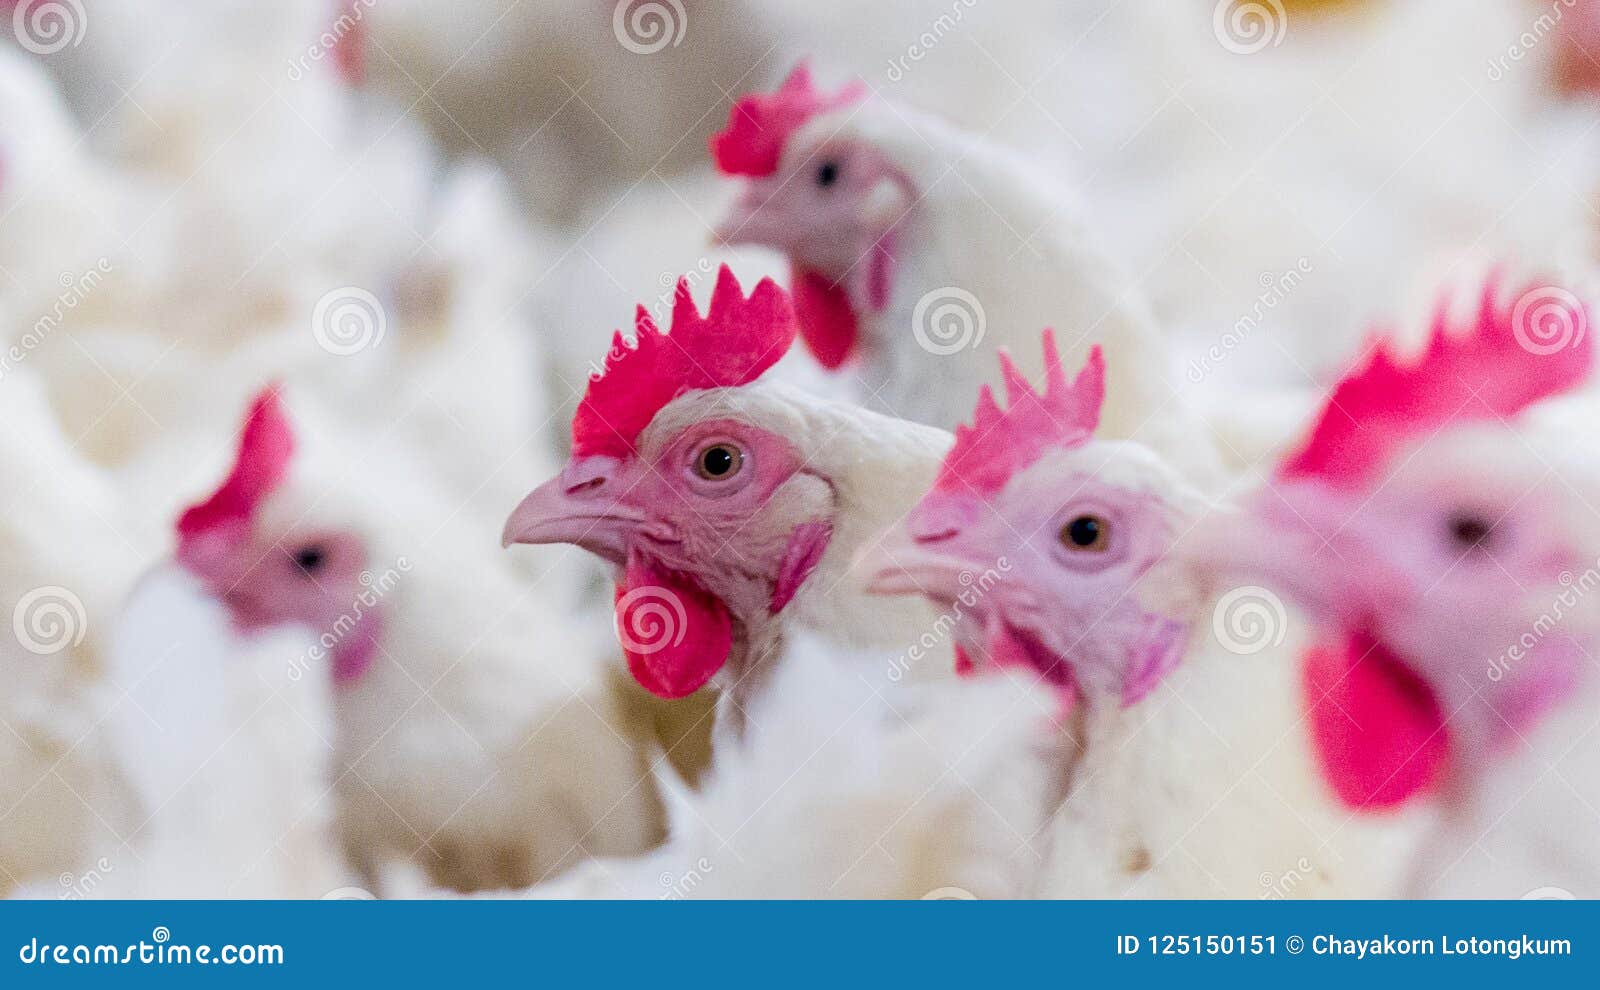 poultry farm with broiler breeder chicken